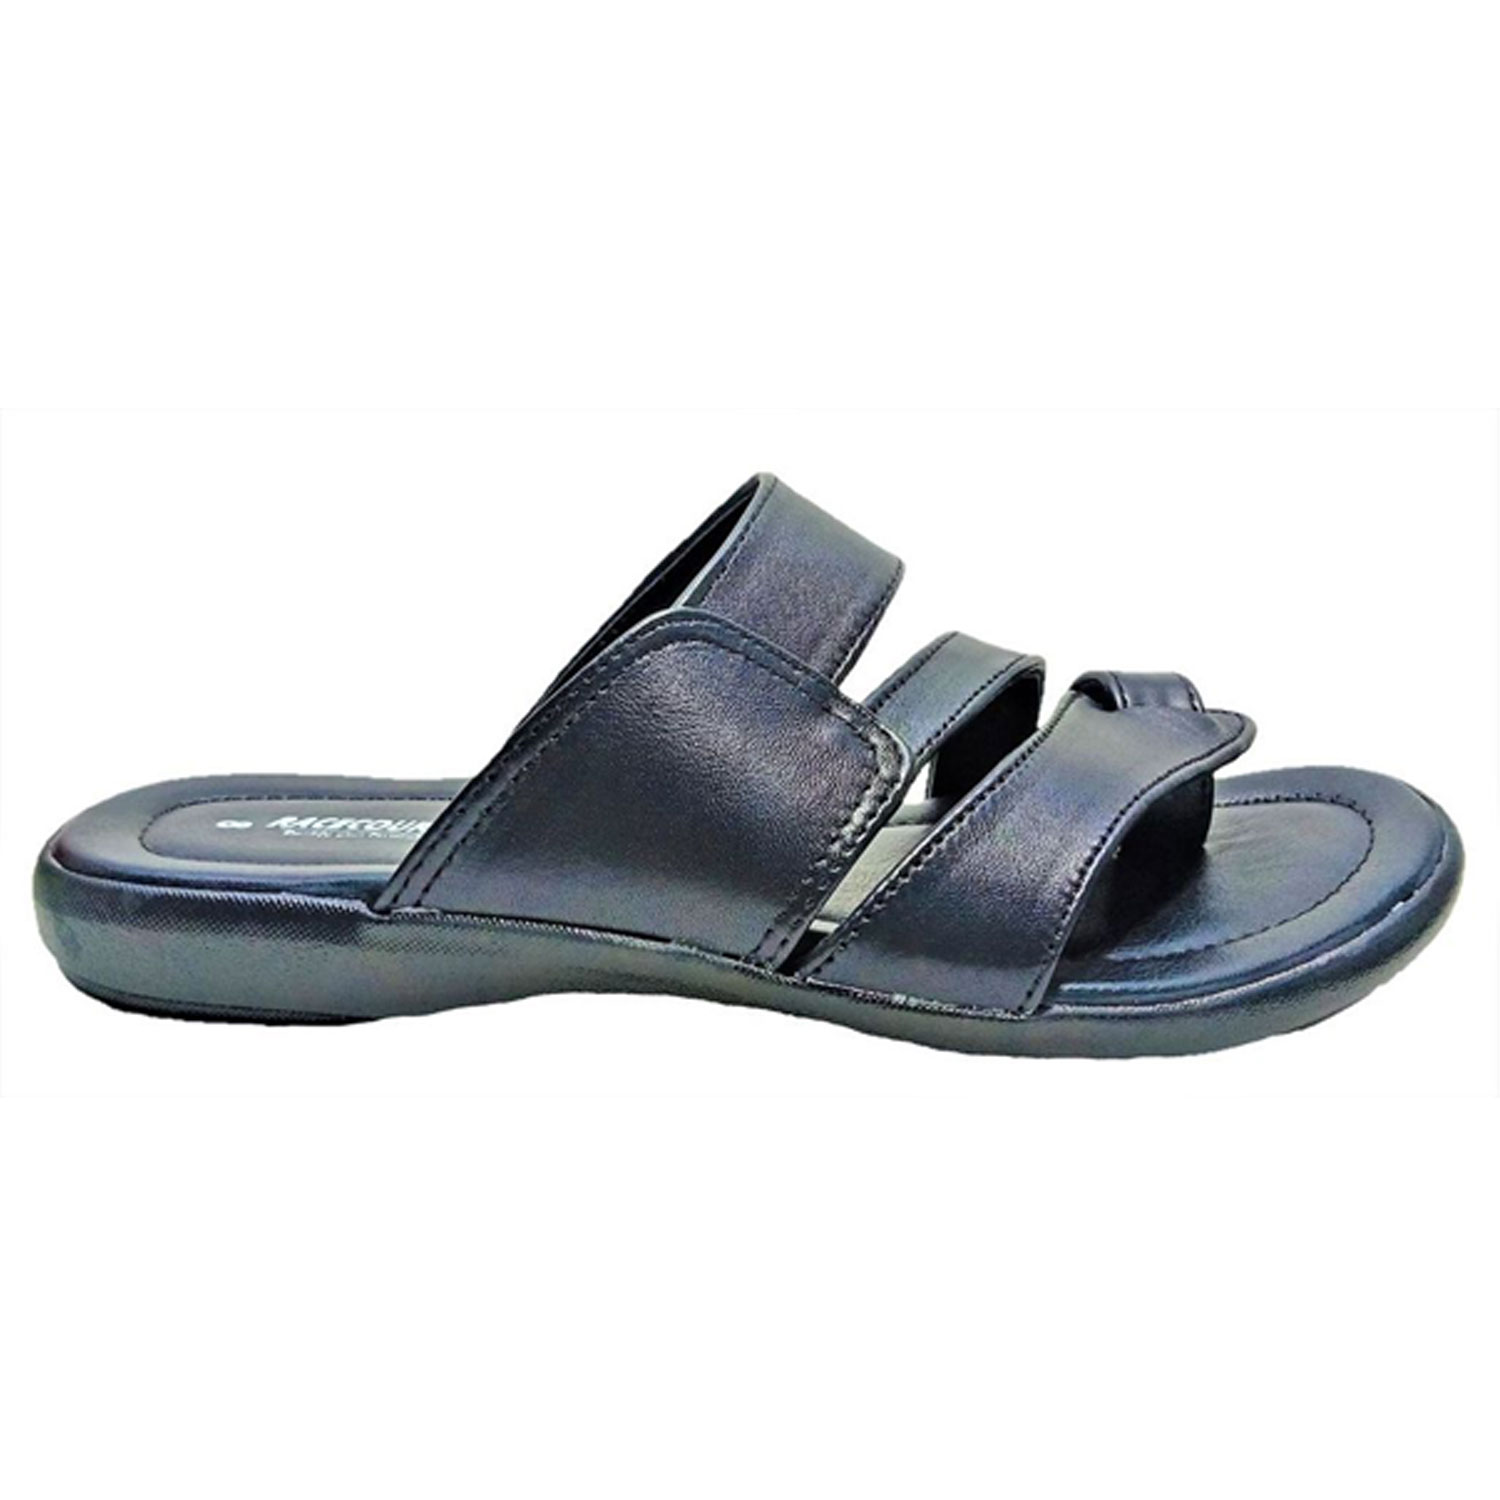 Racecourse Men's Alert Sole Genuine Leather Bond Sandal With the Heel Height of 1 Inch 33.530 Black(Pack of 6 )